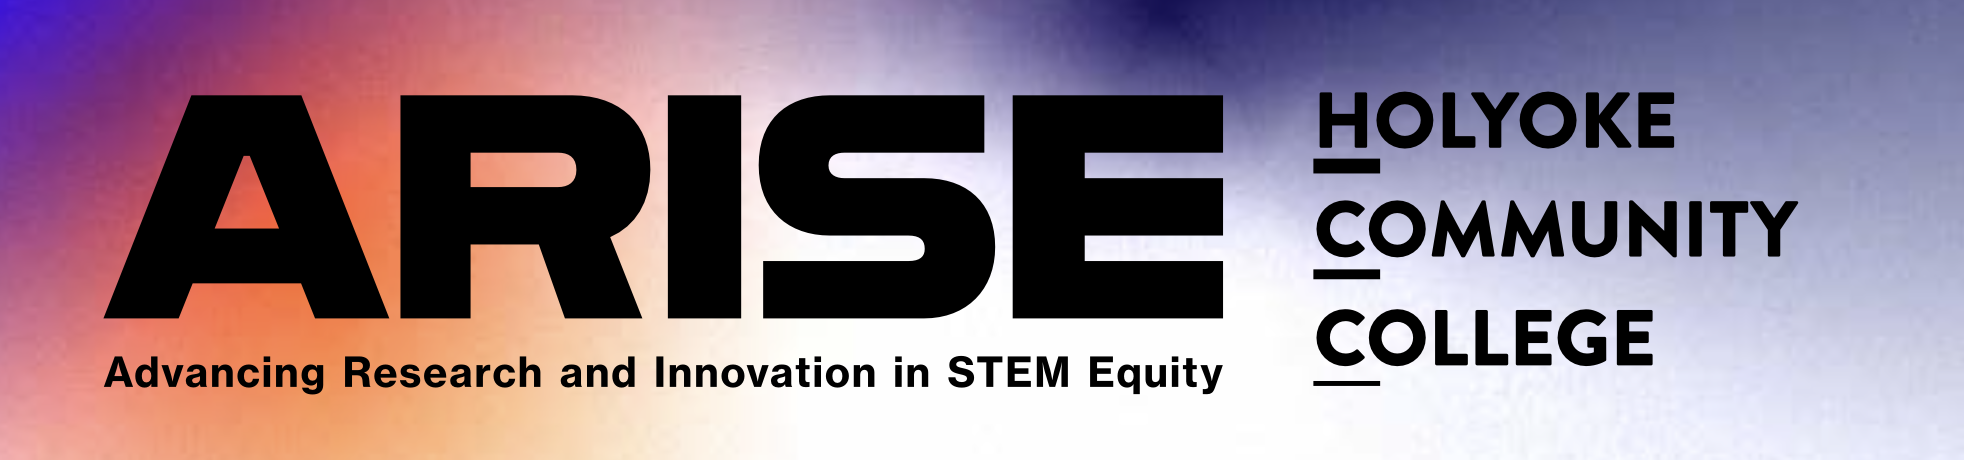 Advancing Research and Innovation in STEM Equity (ARISE)